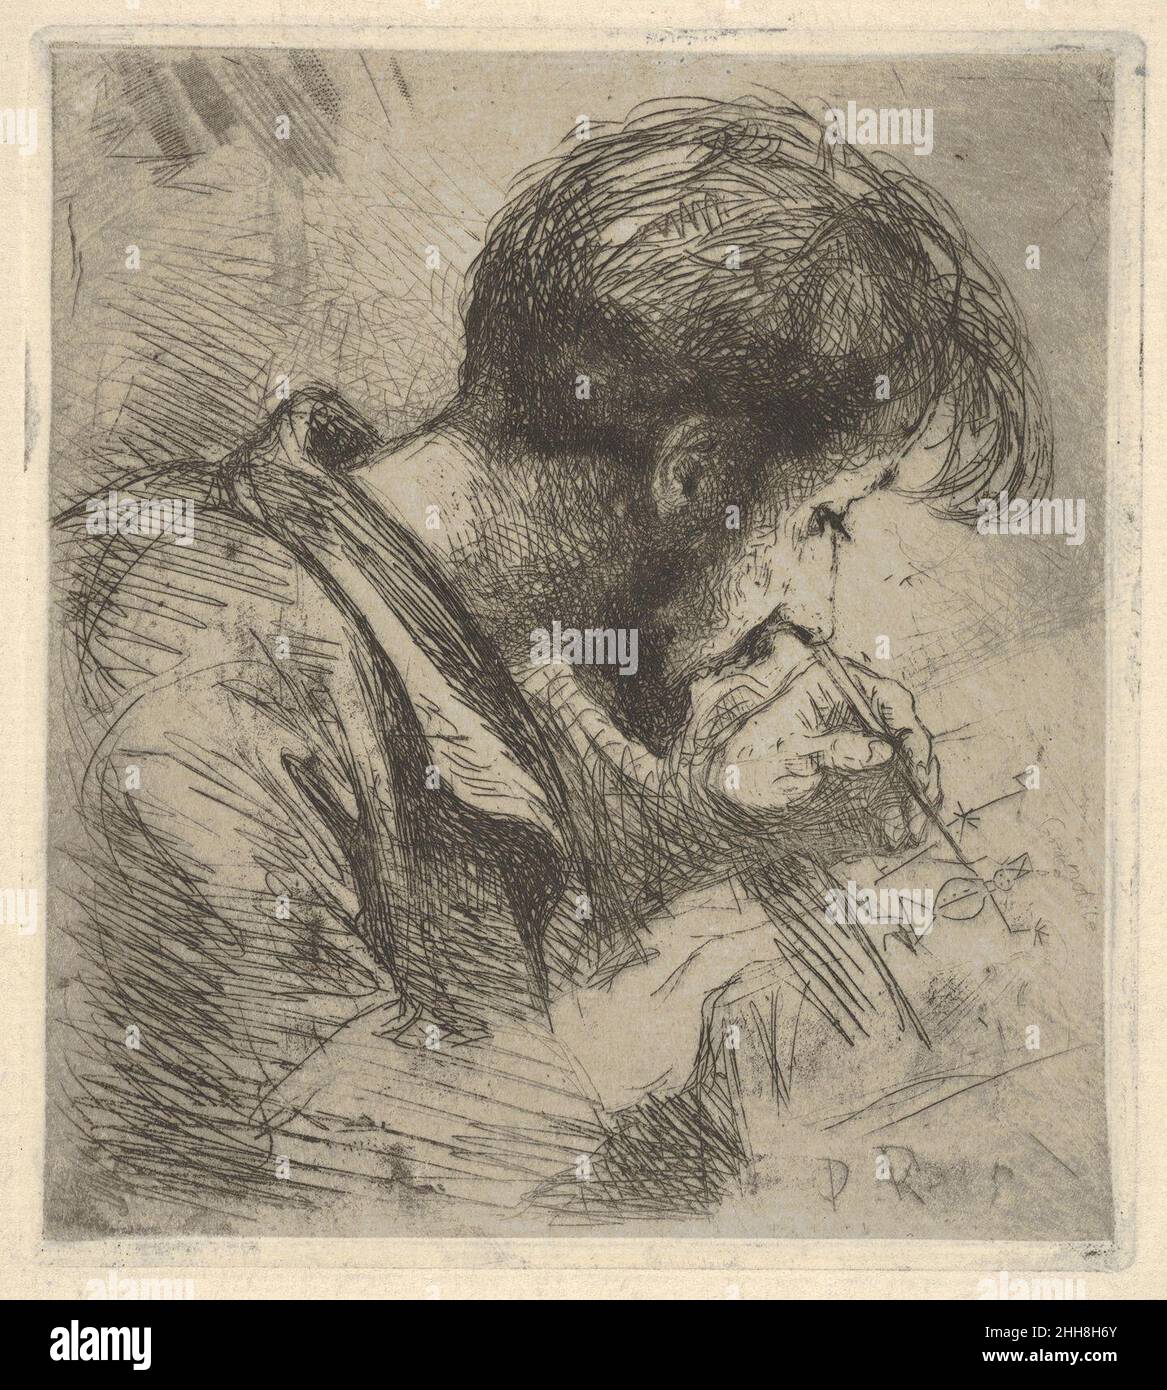 Portrait of Paul Rajon 1867 Emile Boilvin French In this small, sketch-like portrait, Boilvin shows Rajon working intently over an etching plate. The two printmakers were friends since their student days in Metz. Boilvin is gently satirical in his portrayal, making a childlike drawing the product of Rajon's intense concentration. Following Rajon's untimely death in 1888, the portrait acquired an added poignancy and greater public exposure in the 1890s. It was included in the large exhibition of contemporary etching at the Ecole des Beaux-Arts in 1896 and two years later, the French monthly jou Stock Photo